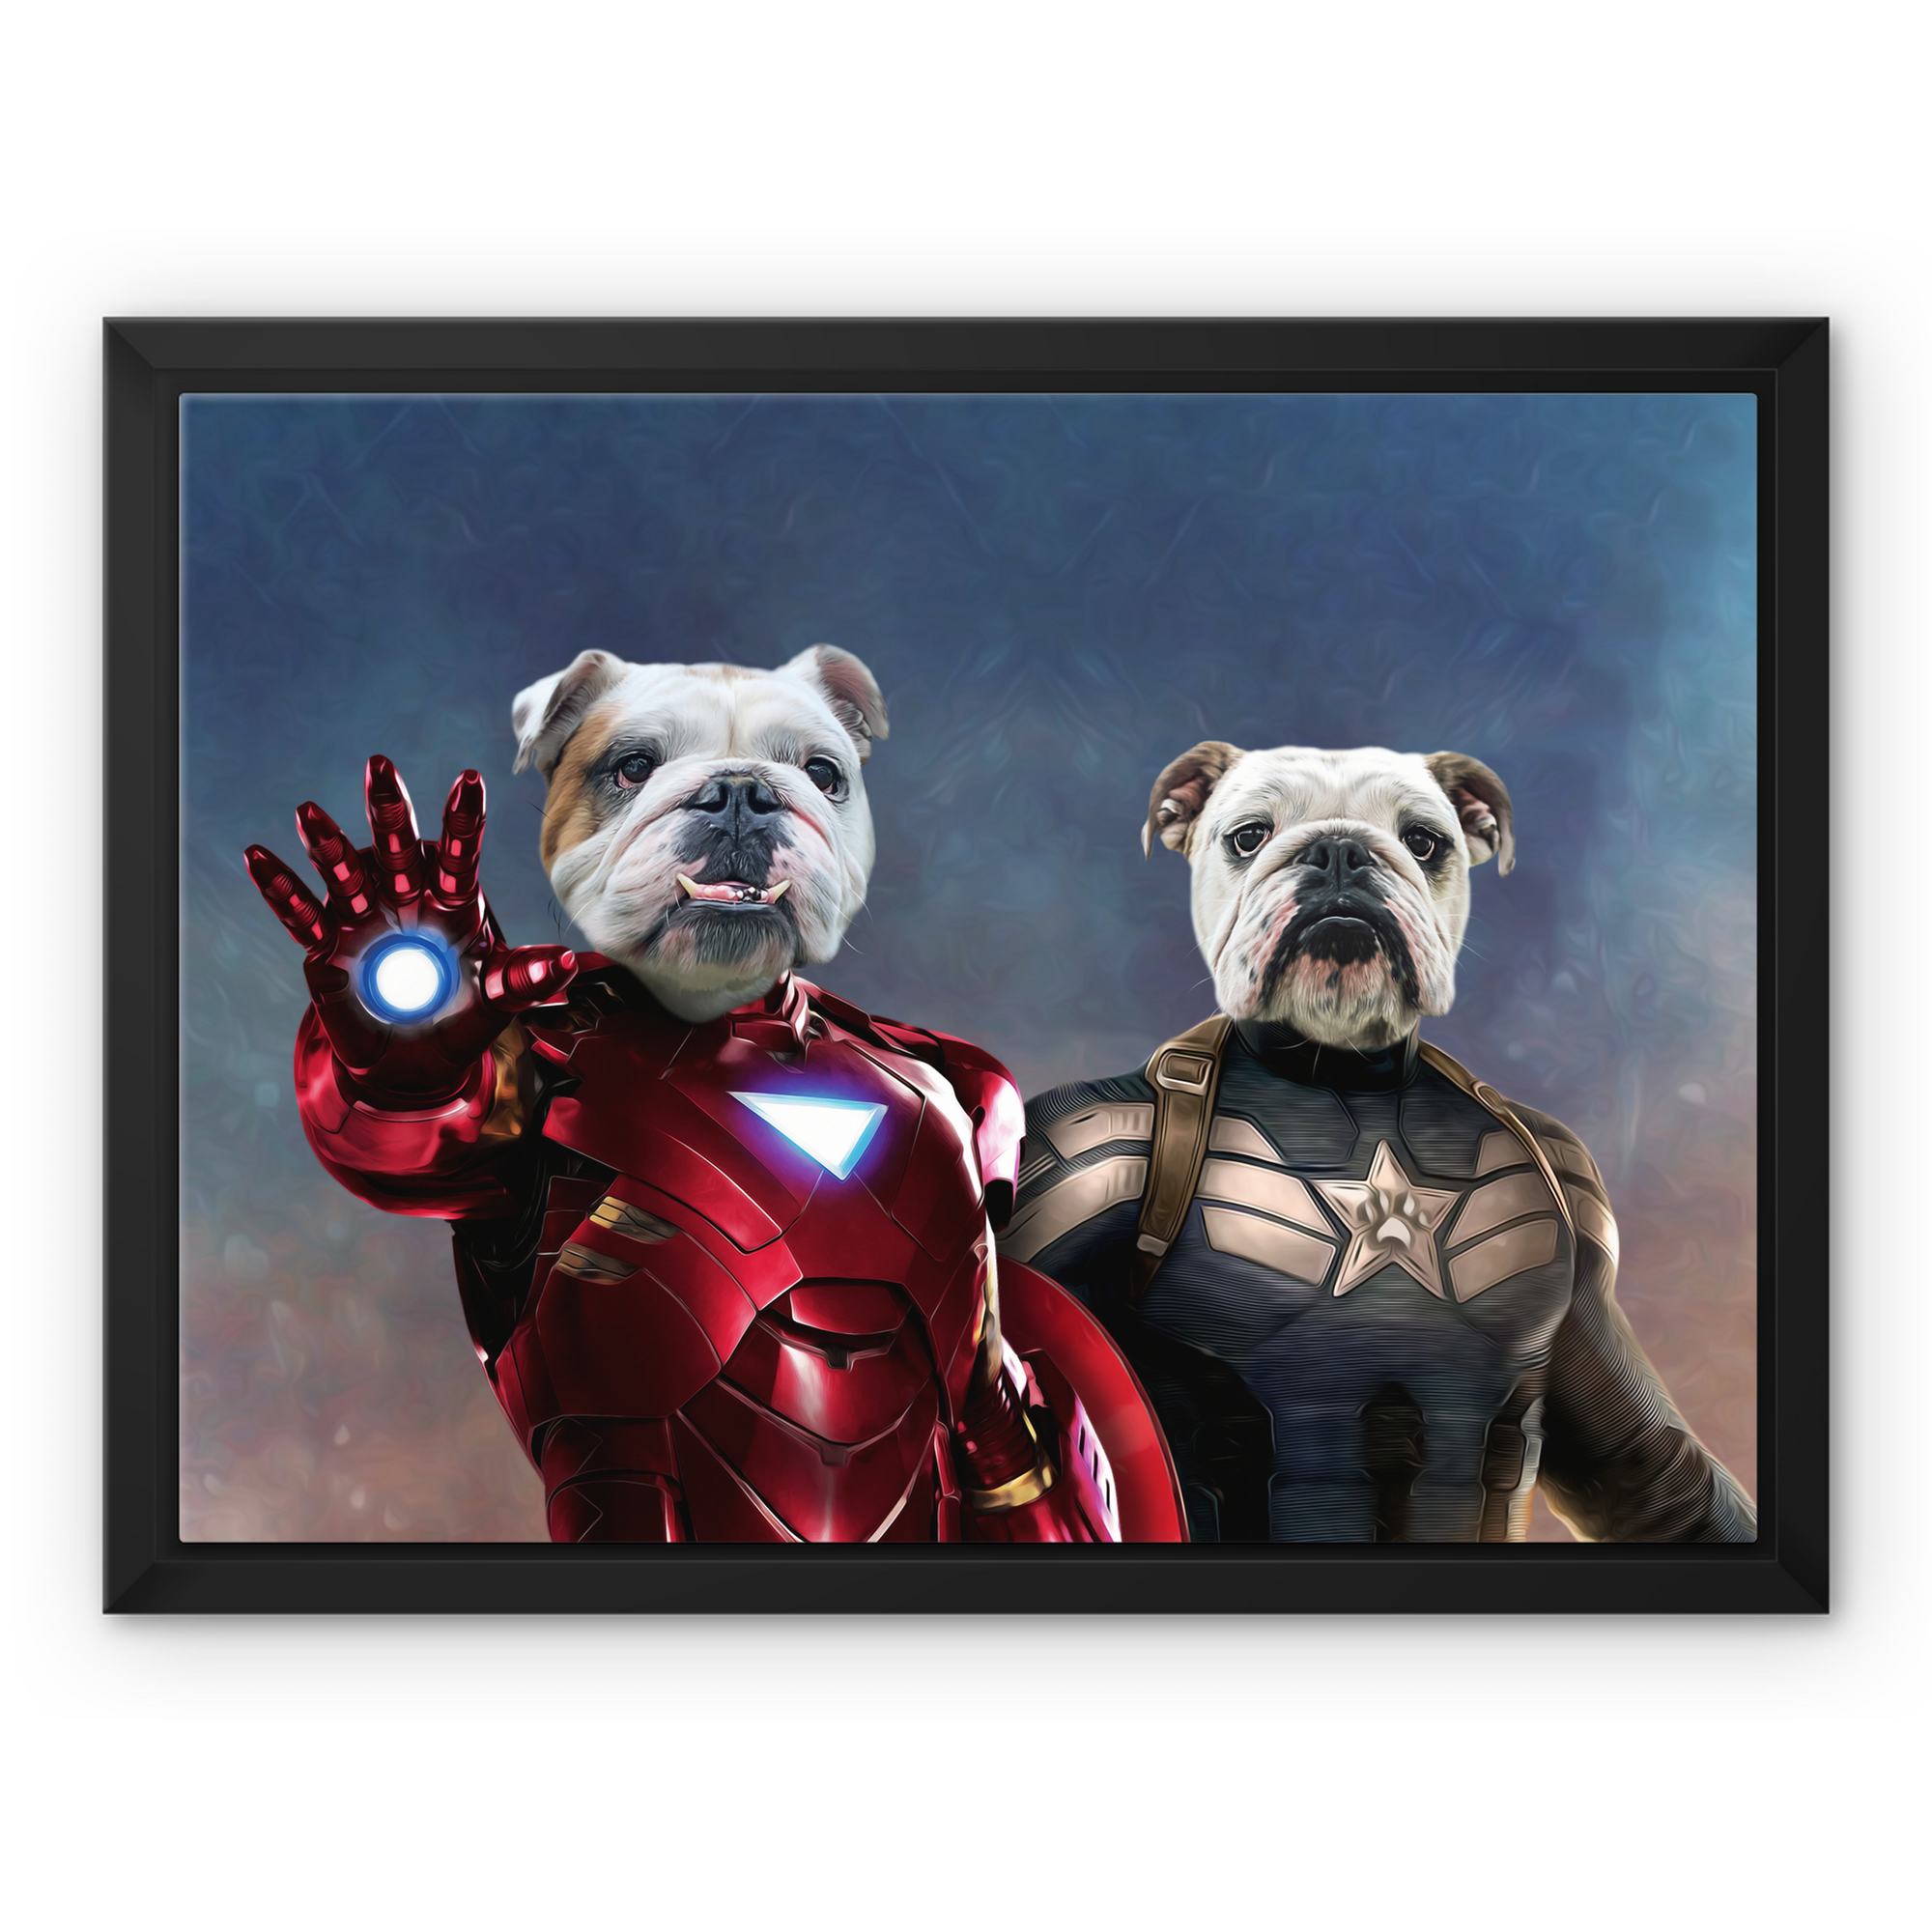 Iron Paw & Captain Pawmerica, Paw & Glory, paw and glory, for pet portraits, painting of your dog, professional pet photos, best dog paintings, animal portrait pictures, hogwarts dog houses, pet portrait